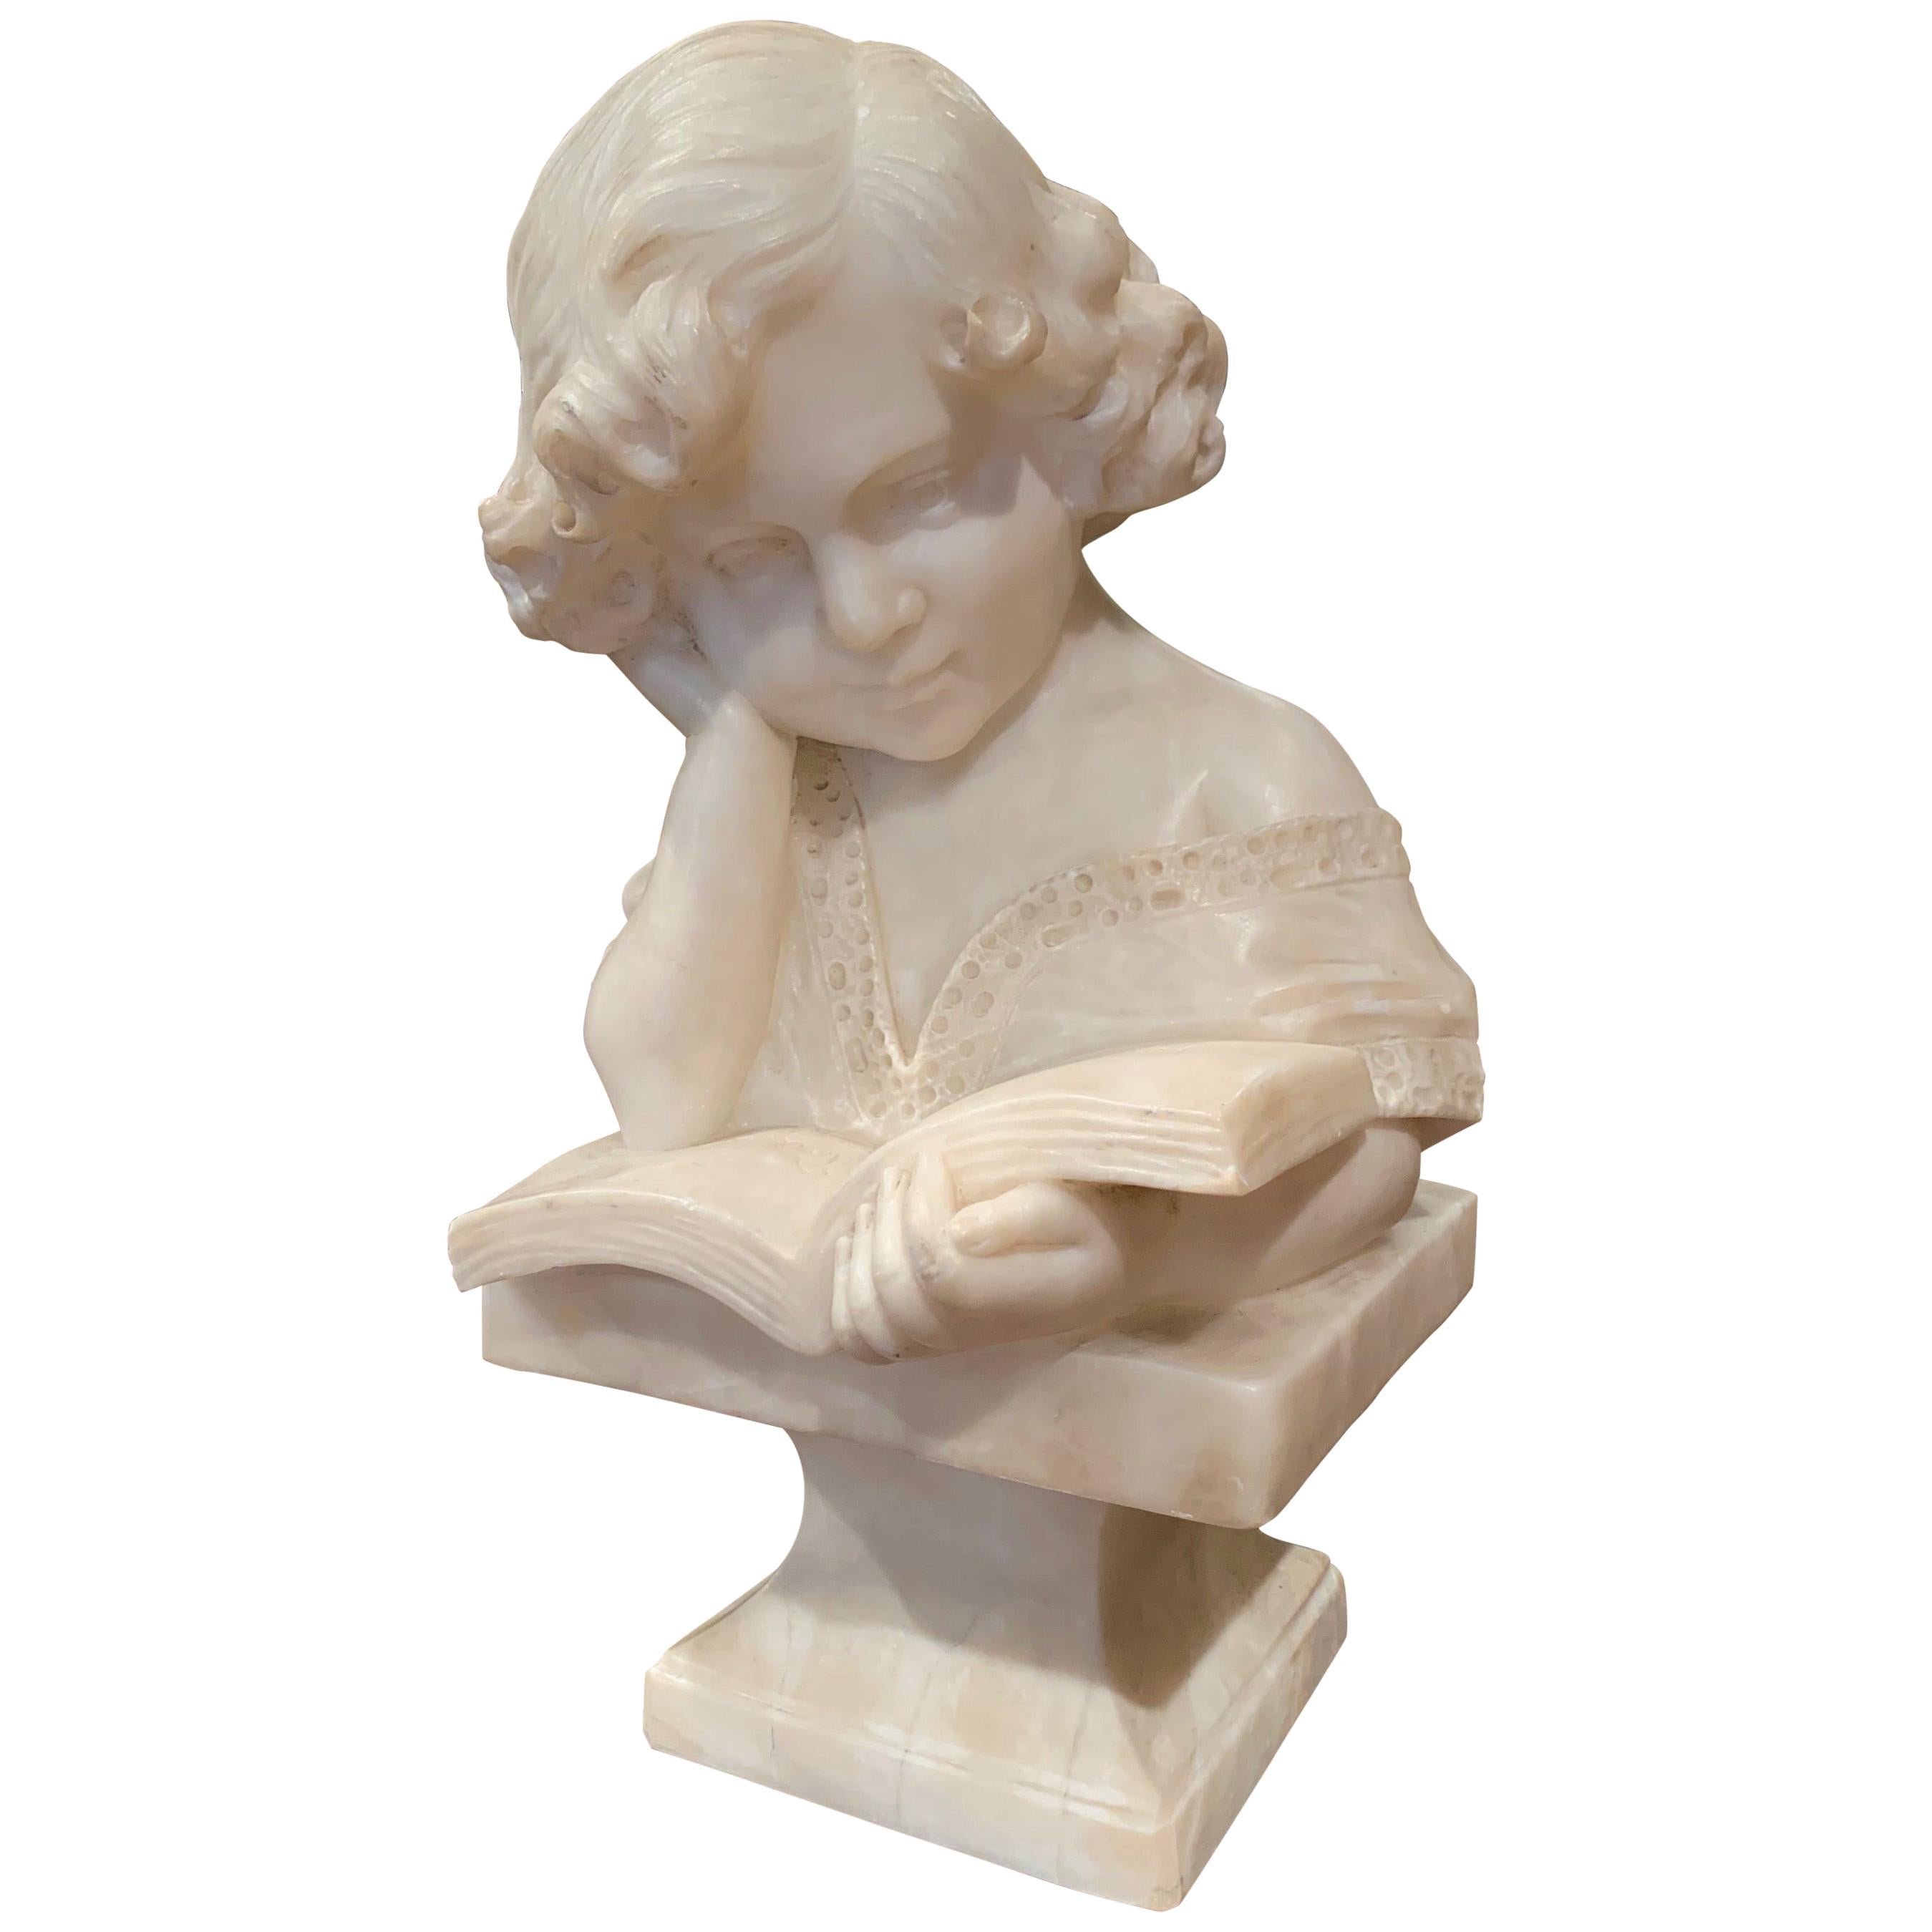 19th Century Italian Carved Marble Bust of a Young Girl Signed R. Bernardi Praga